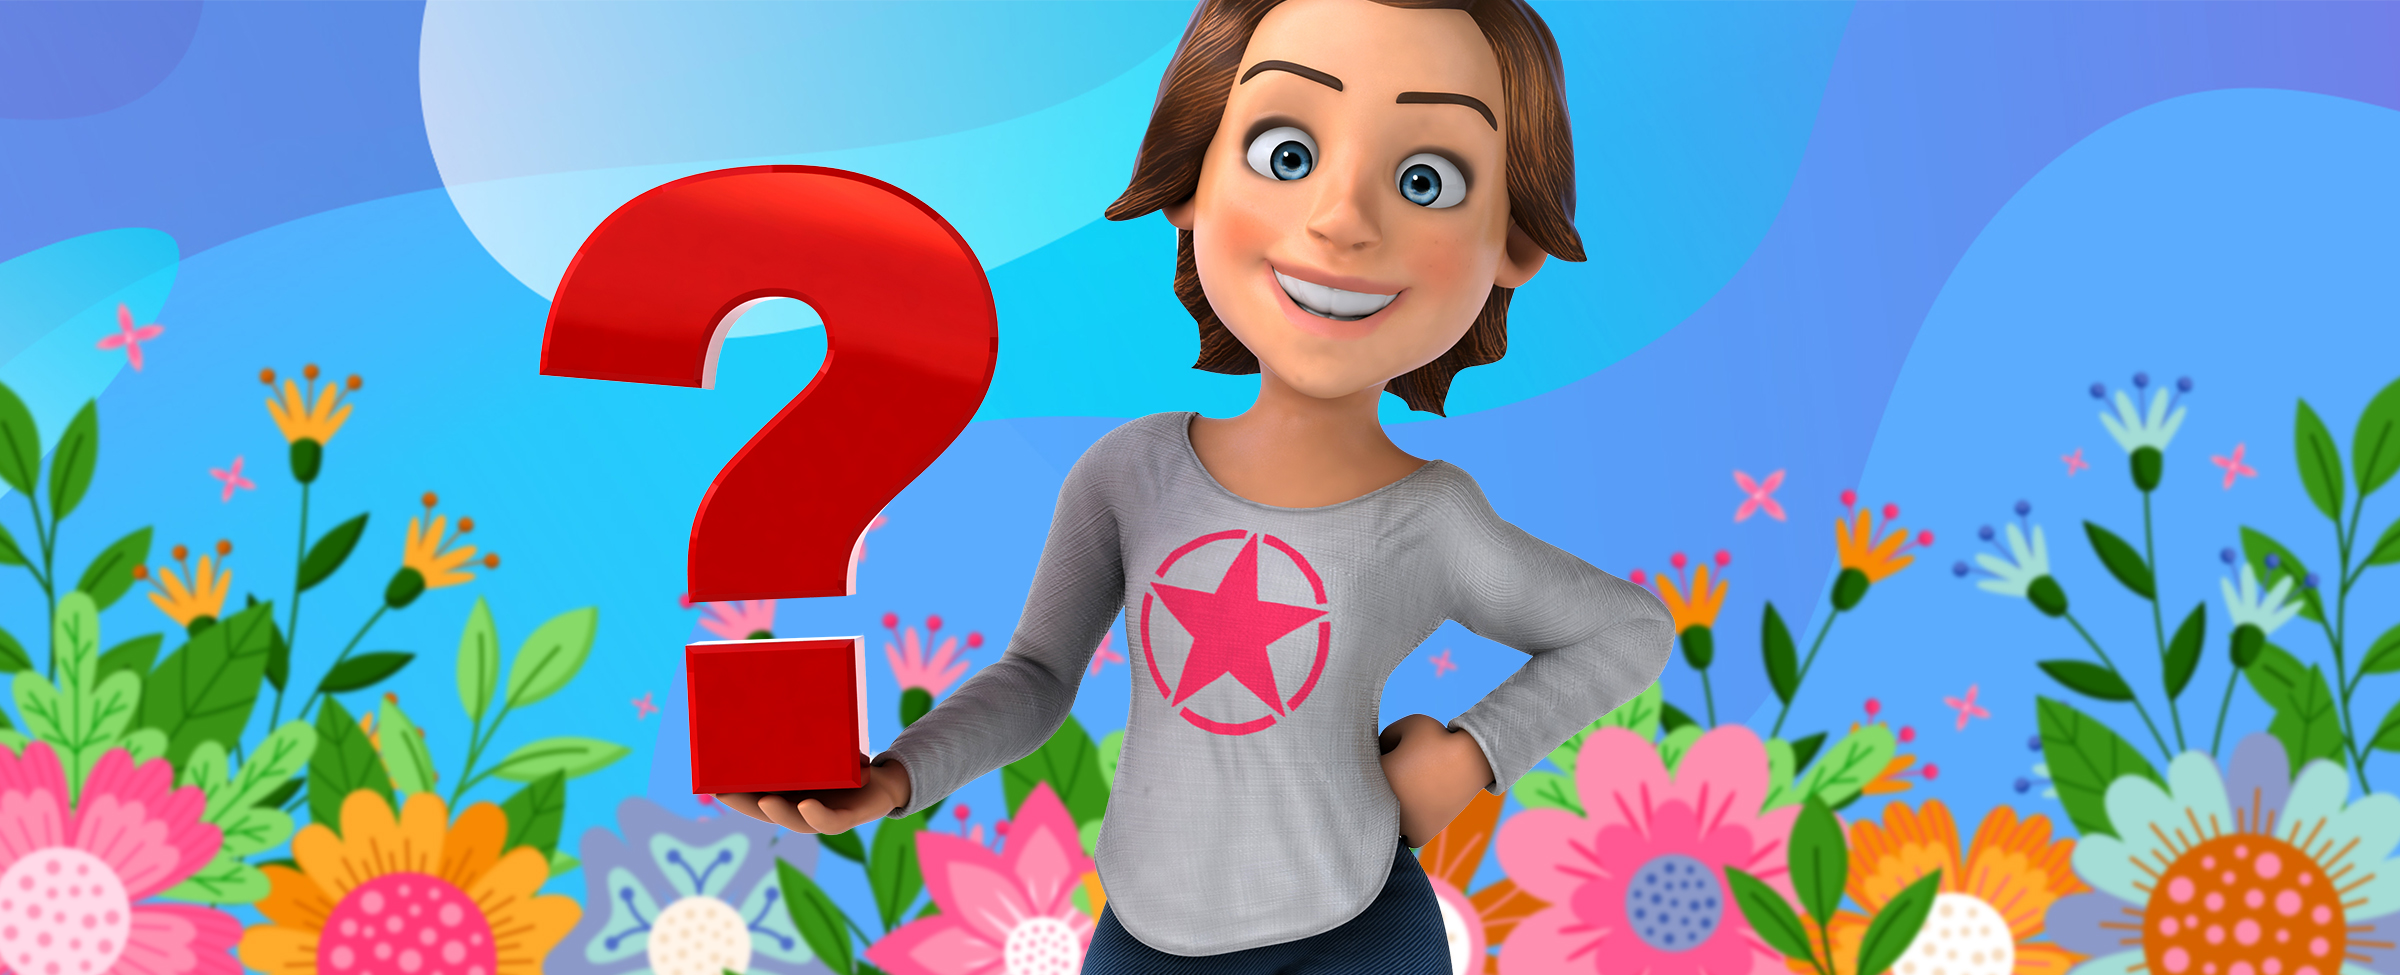 A 3D-animated woman is seen from the waist up, standing with one arm on her hips, and the other holding up an oversized red question mark. Behind her are a range of colorful illustrated flowers of all varieties